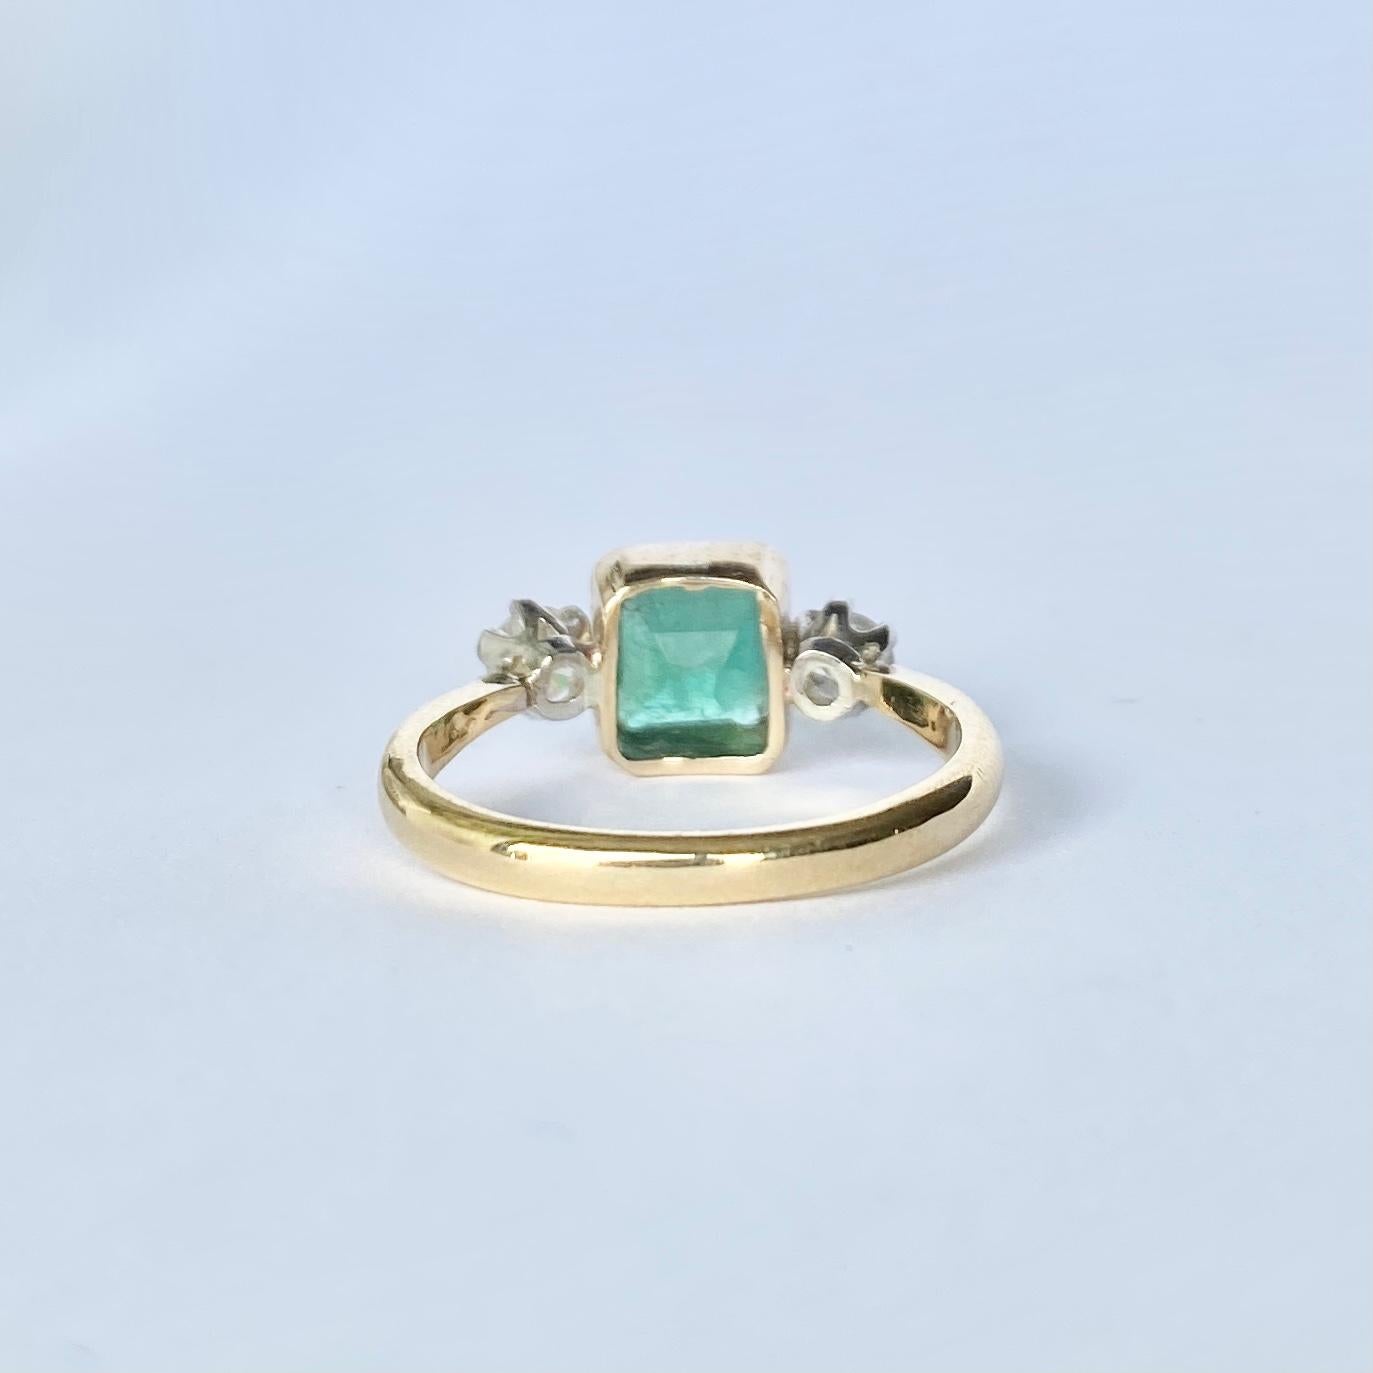 The central emerald is so bright and beautiful and measures approx 1.05ct. Sat either side it are two bright shimmering old European cut diamonds each measuring 20pts. The ring is modelled in 18ct gold and the diamonds are set in platinum. 

Ring